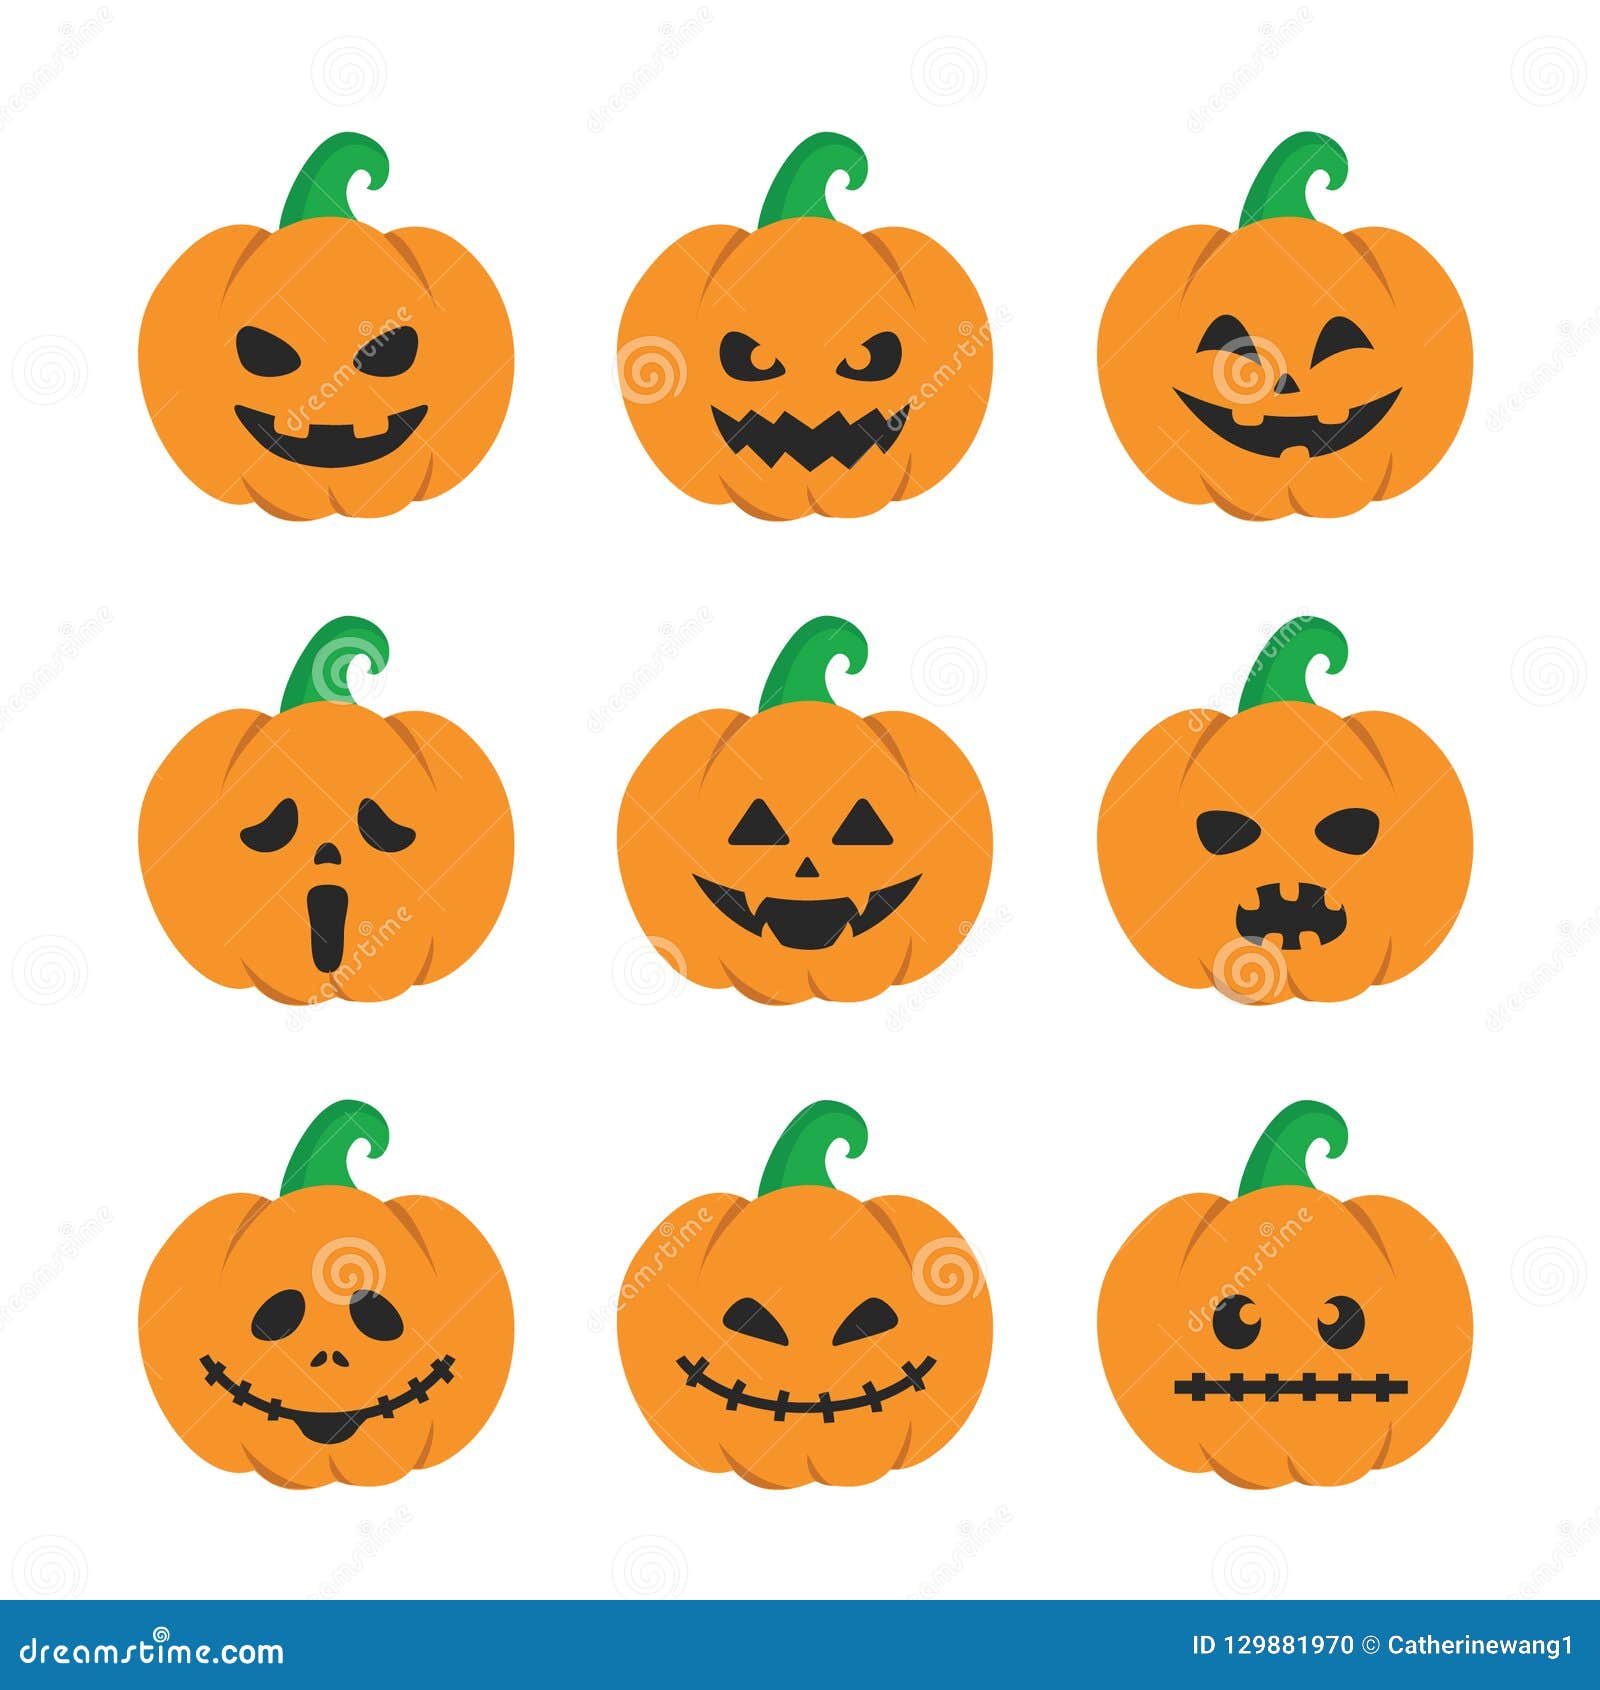 Halloween Pumpkin Set with Faces Stock Vector - Illustration of ...